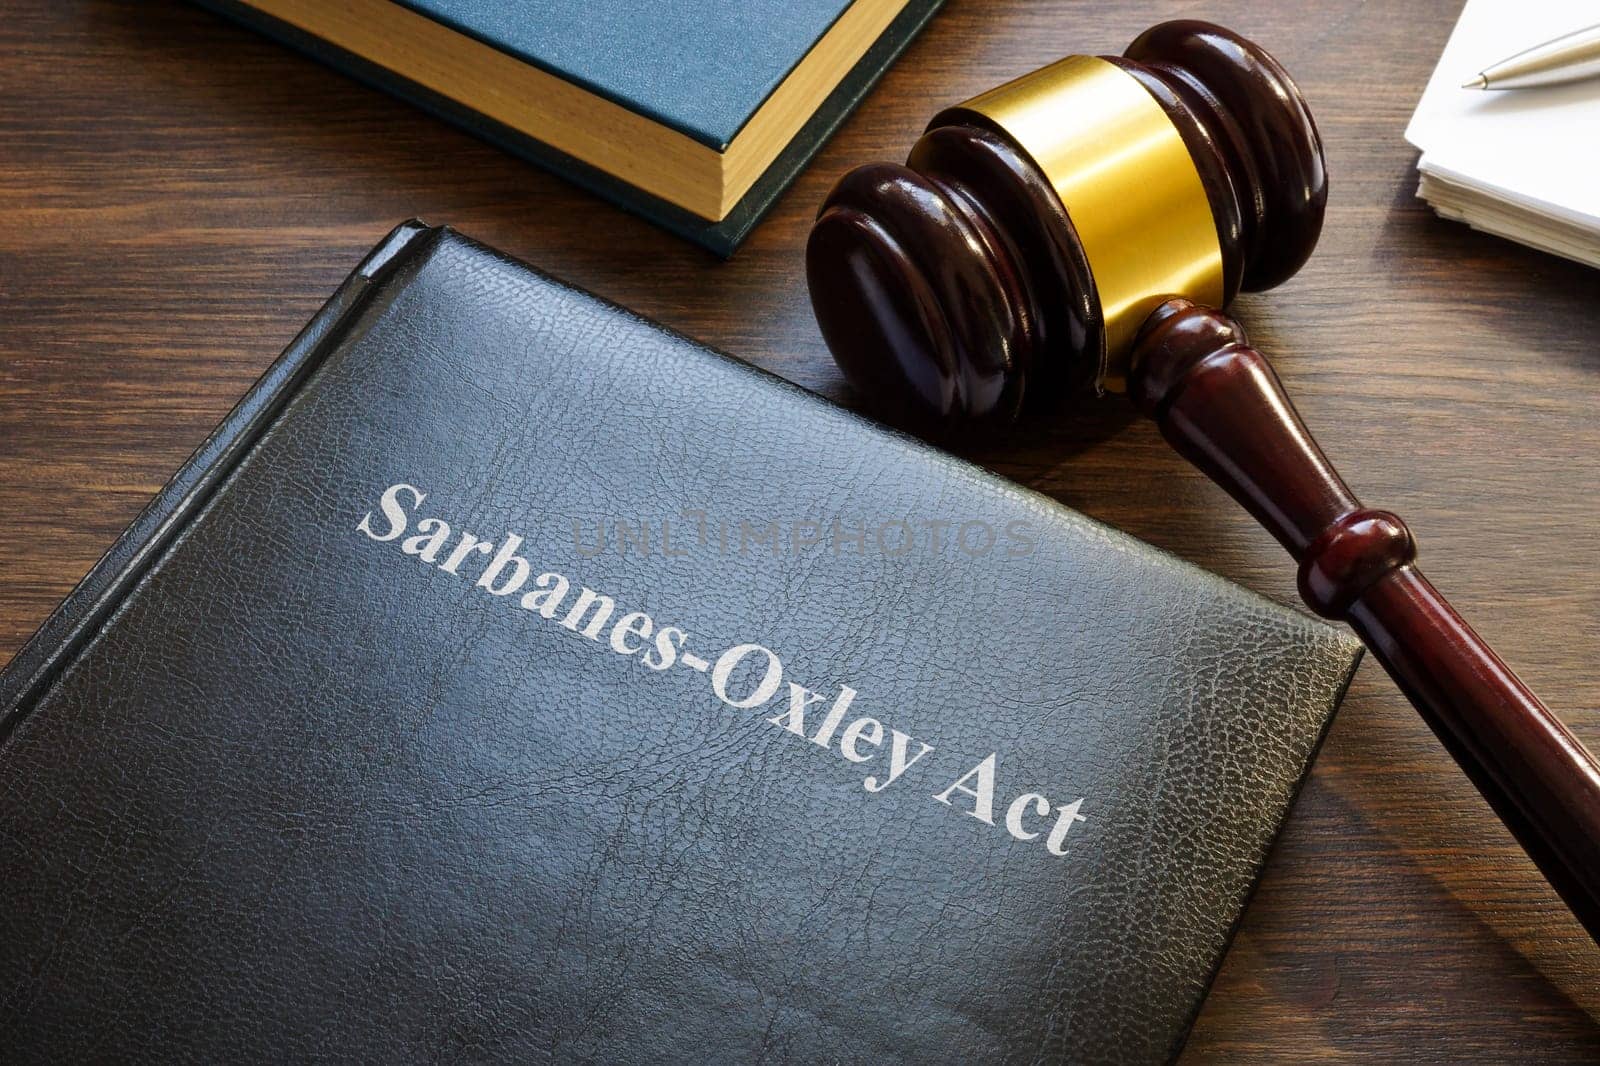 Sarbanes-Oxley act. A book with laws and gavel on the table. by designer491